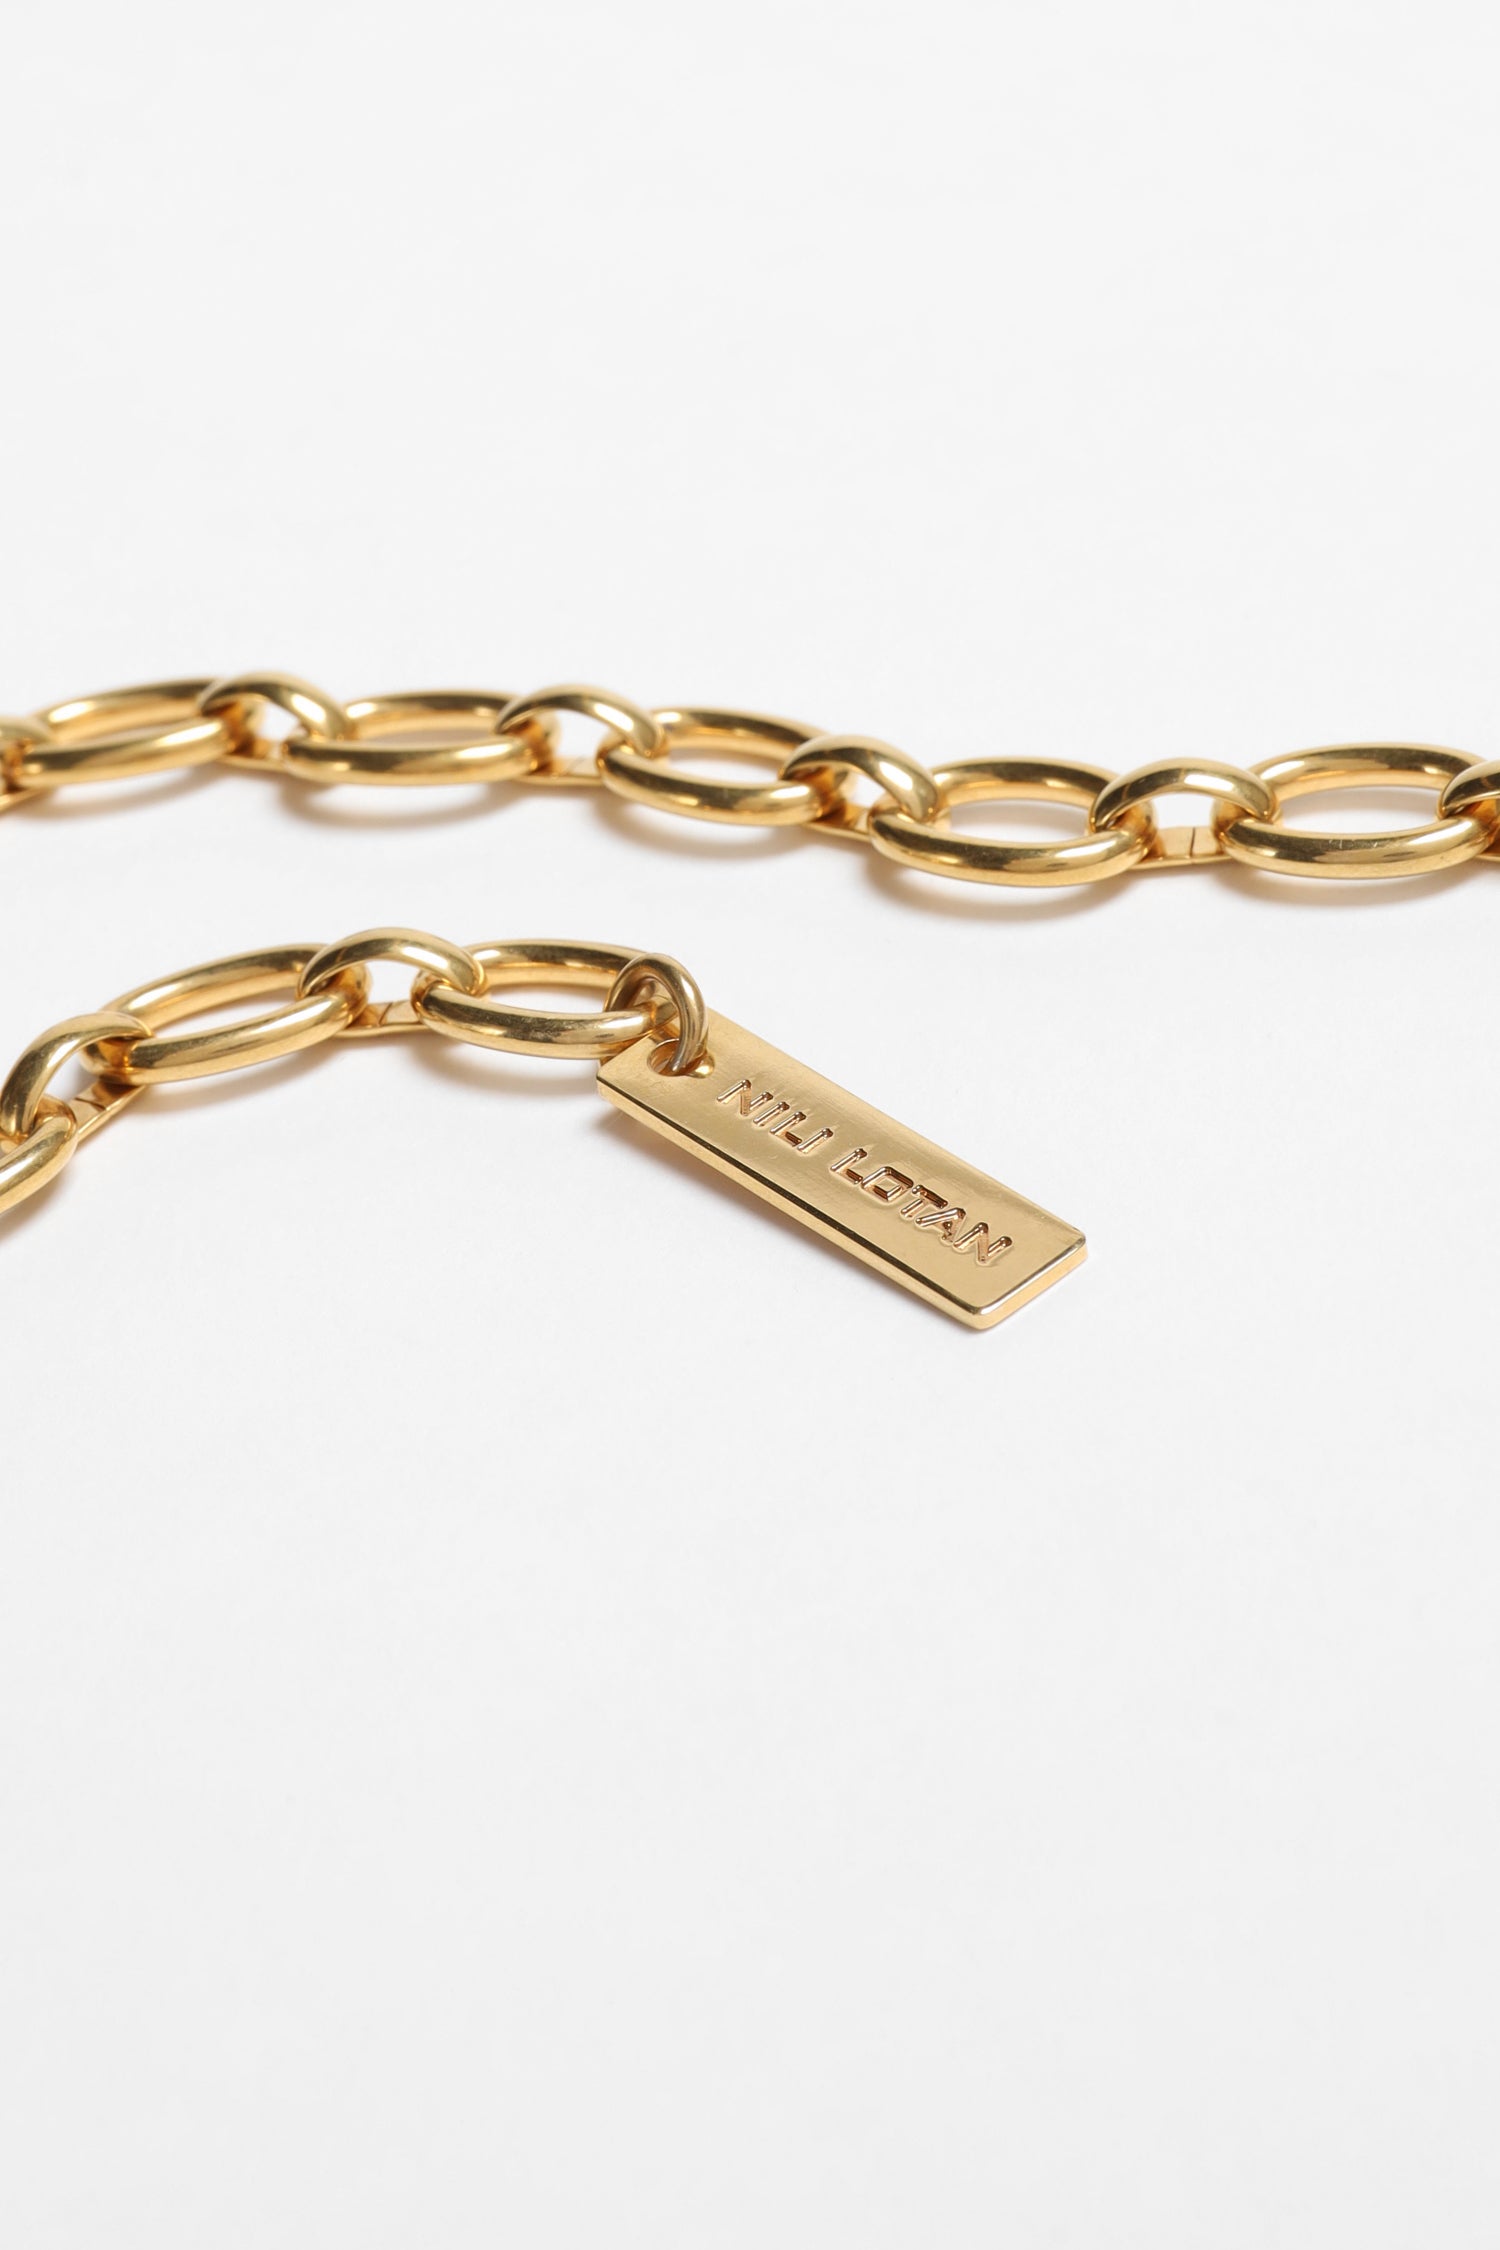 The Nili Lotan Colette Chain Belt in Gold available at The New Trend Australia